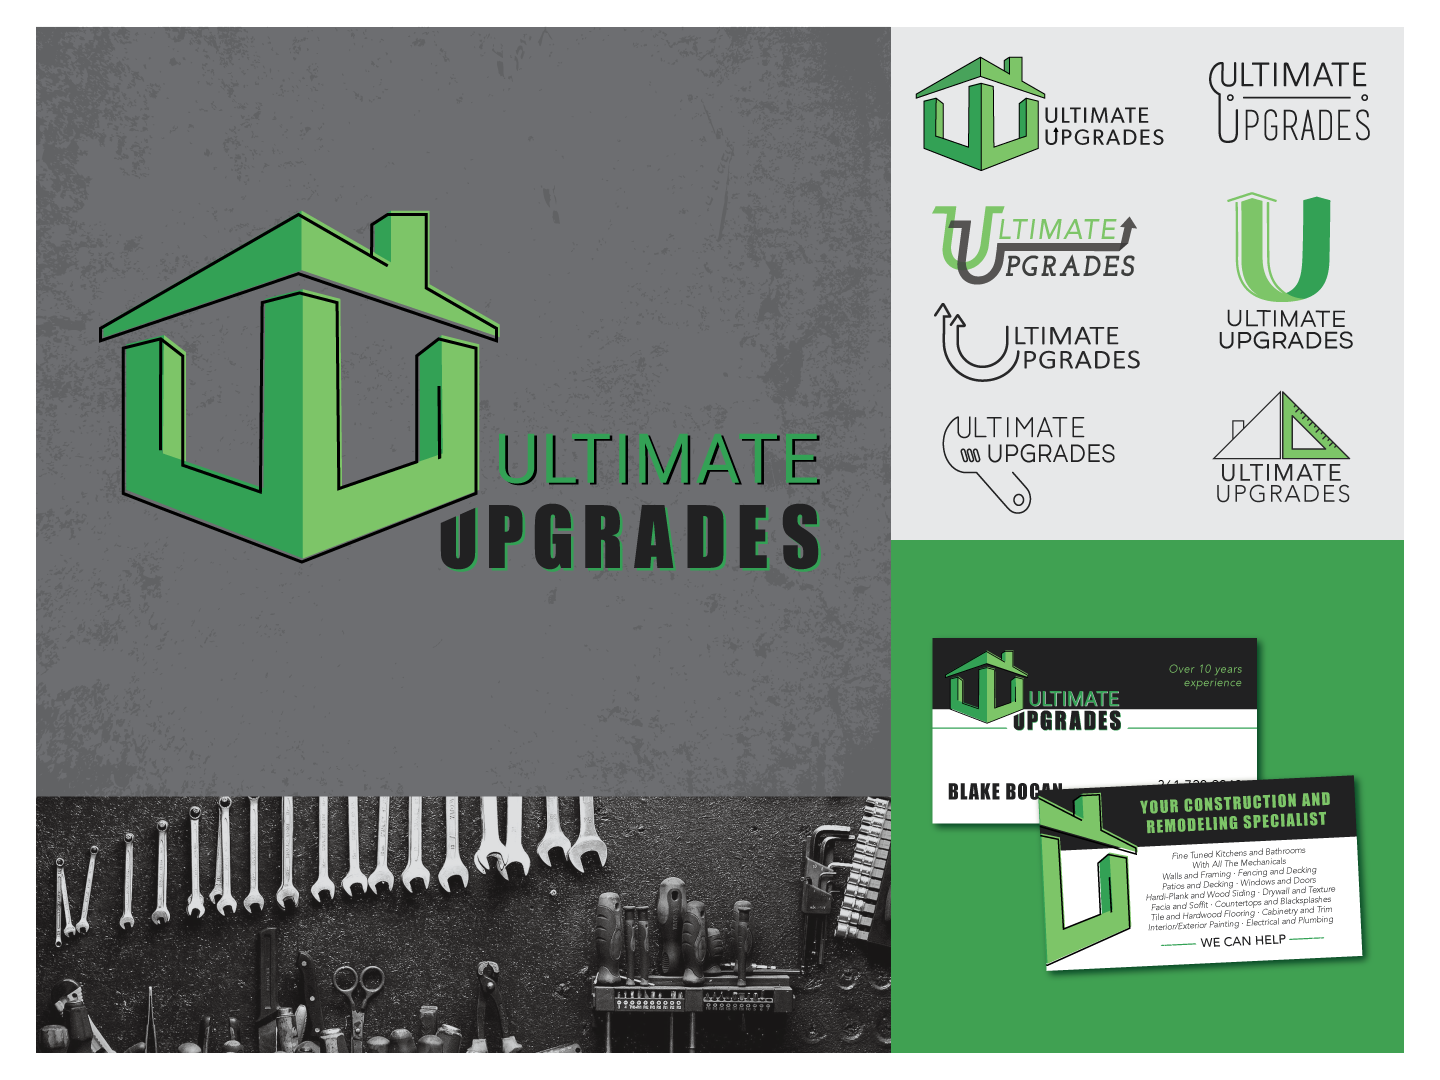 Ultimate Upgrades Logo by Brittany Newville on Dribbble